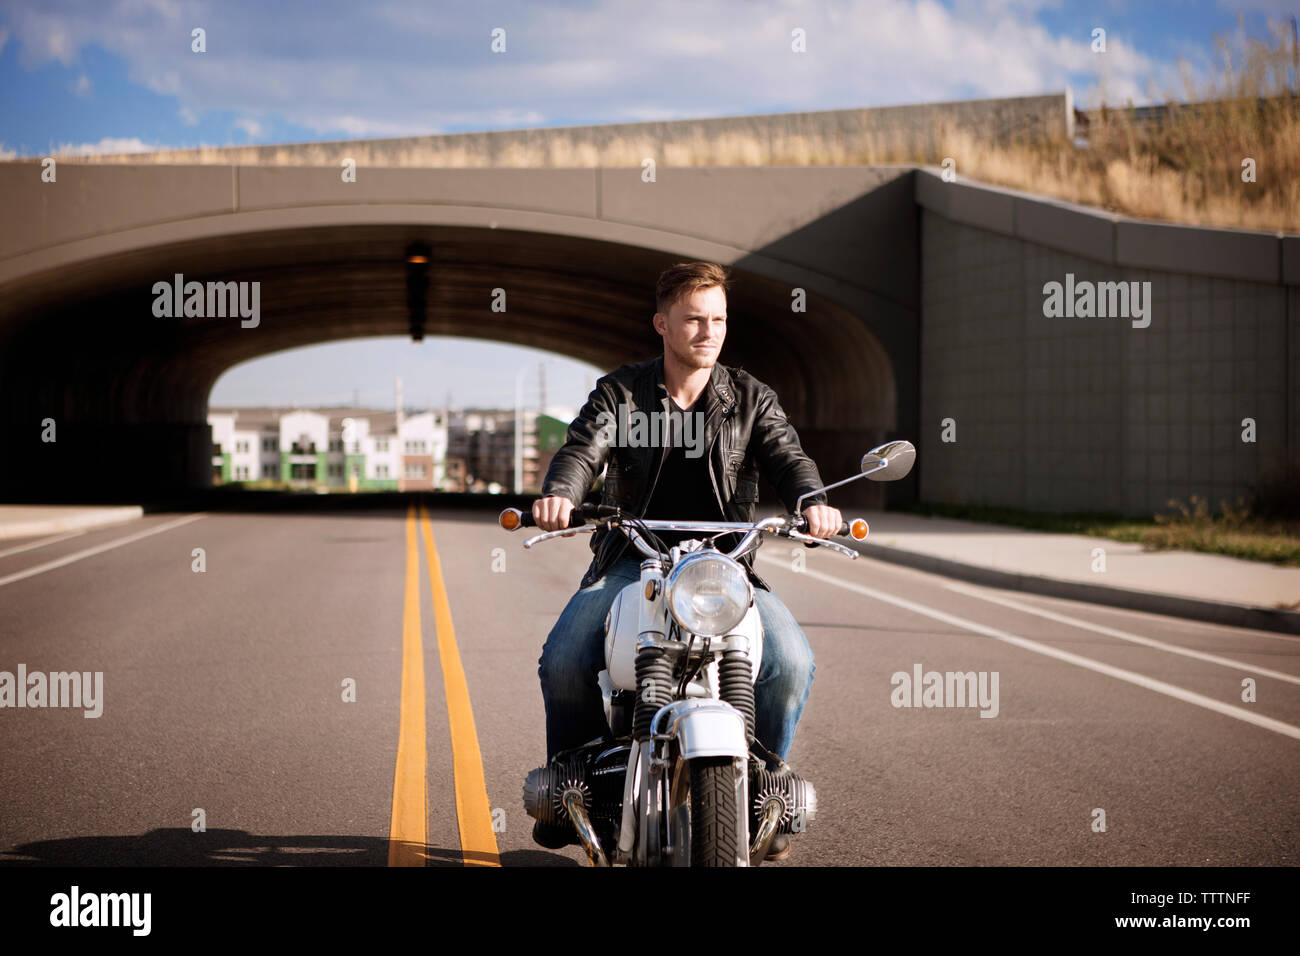 Biker riding motorcycle with bridge in background Stock Photo